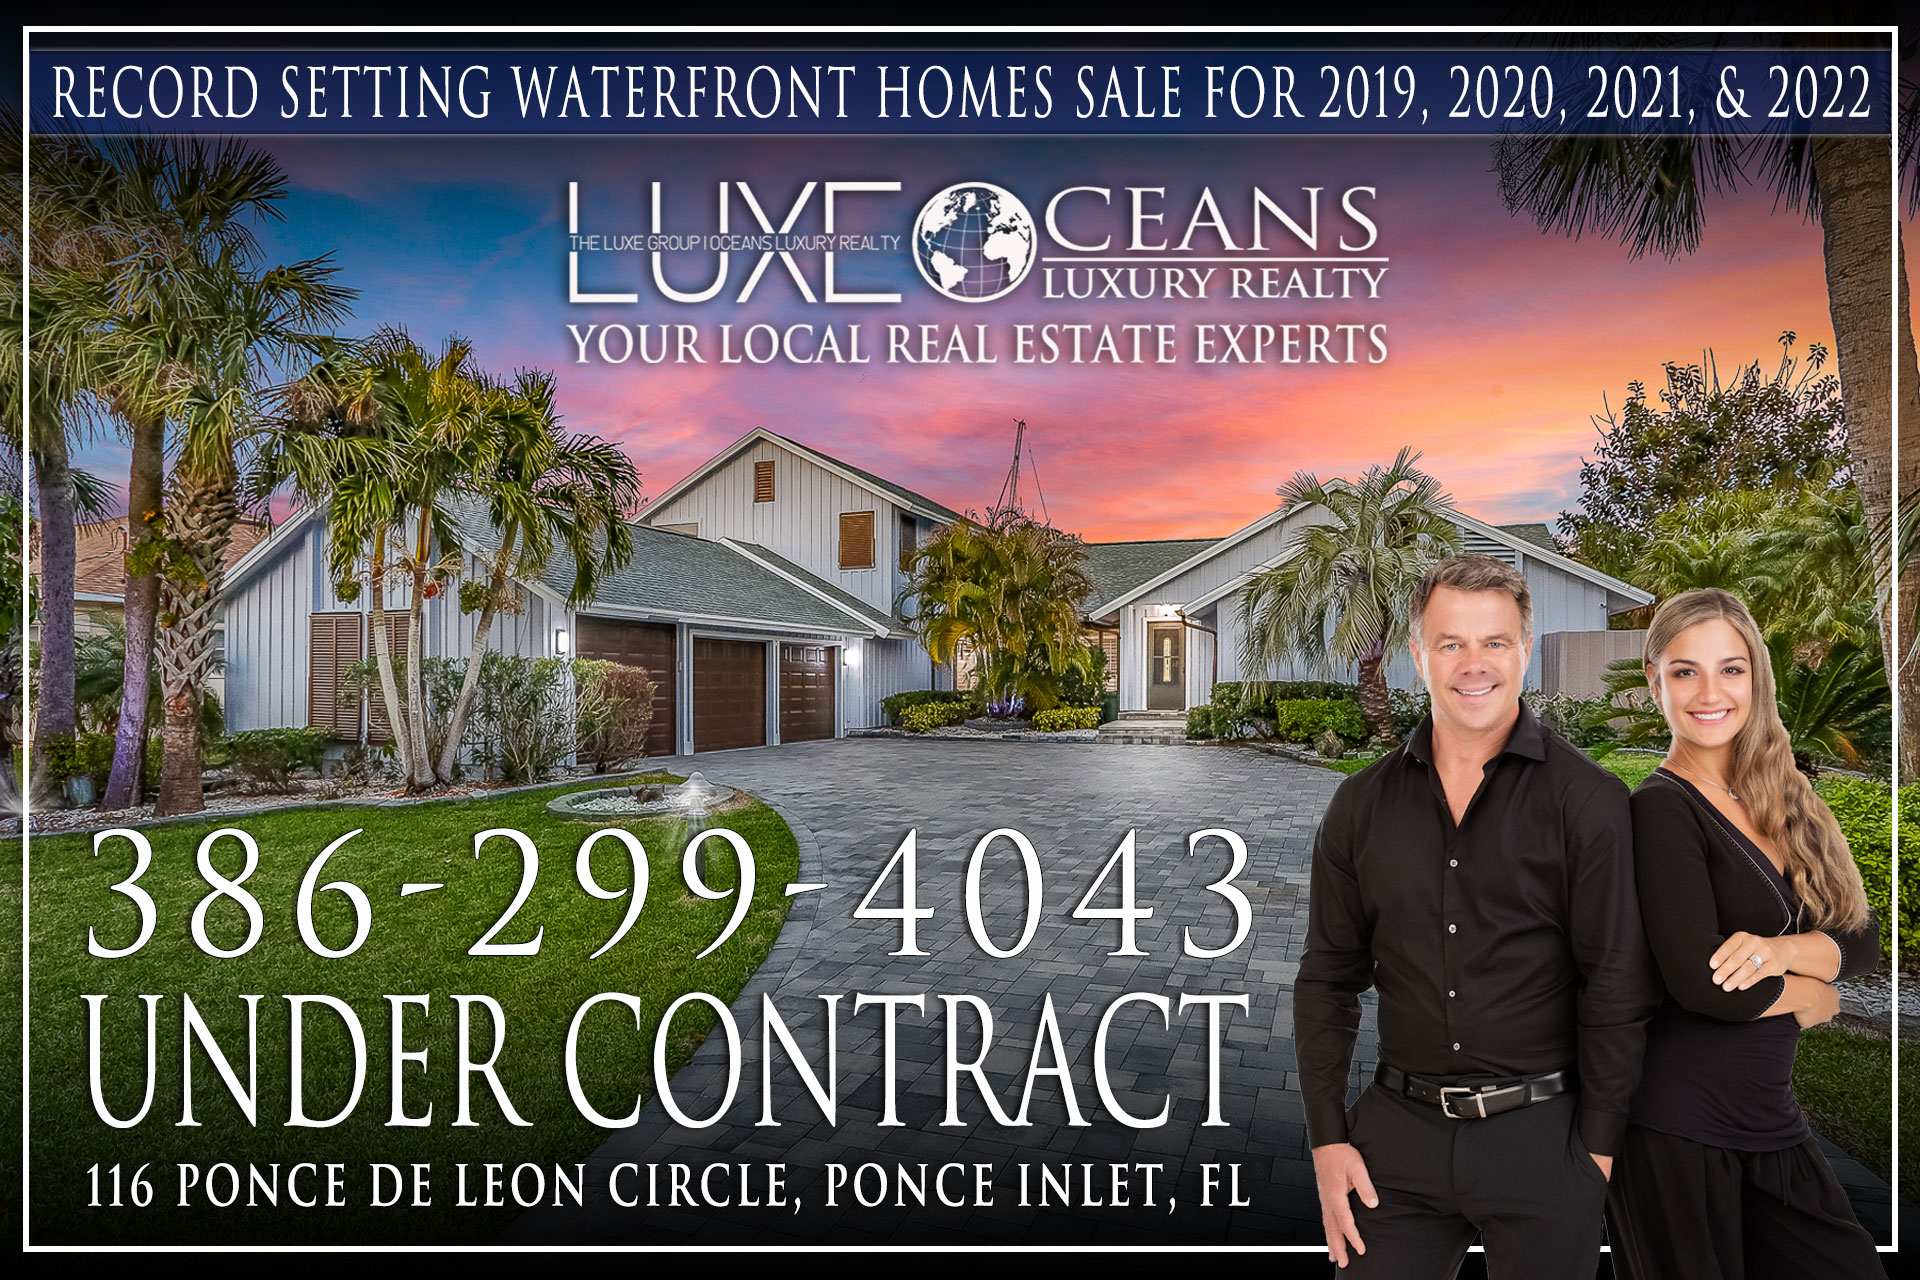 Ponce Inlet Florida Riverfront Homes For Sale. 116 Ponce De Leon Circle Ponce Inlet is now under contract. The LUXE Group at Oceans Luxury Realty 386-299-4043